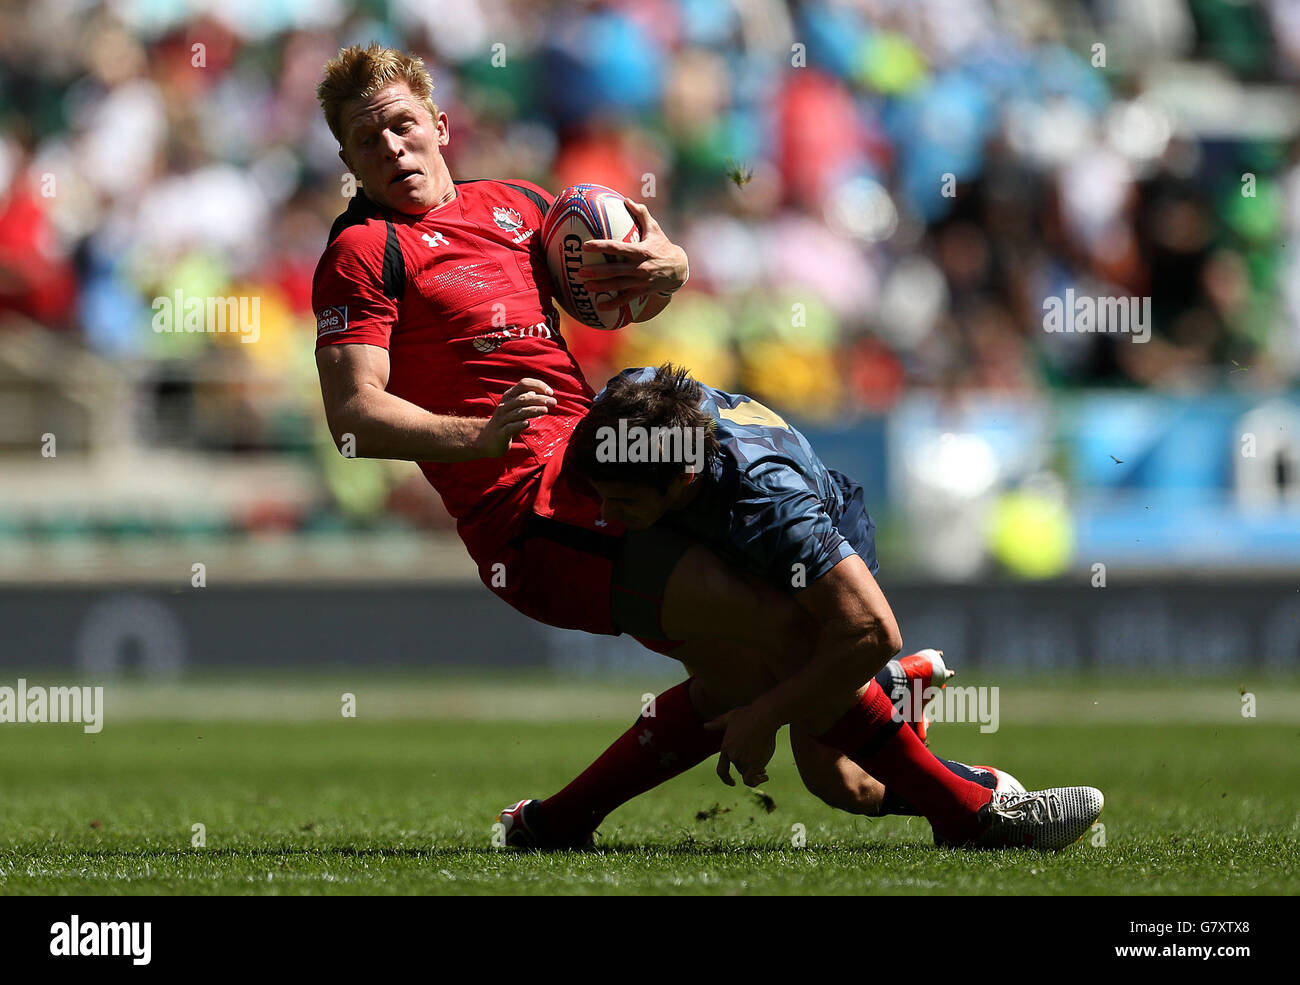 Canada's John Moonlight is tackled by Argentina's Rodrigo Etchart in the Pool A match during the Marriott London Sevens at Twickenham Stadium, London. PRESS ASSOCIAION Photo. Picture date: Saturday May 16, 2015. See PA story RUGBYU London. Photo credit should read: Steven Paston/PA Wire Stock Photo